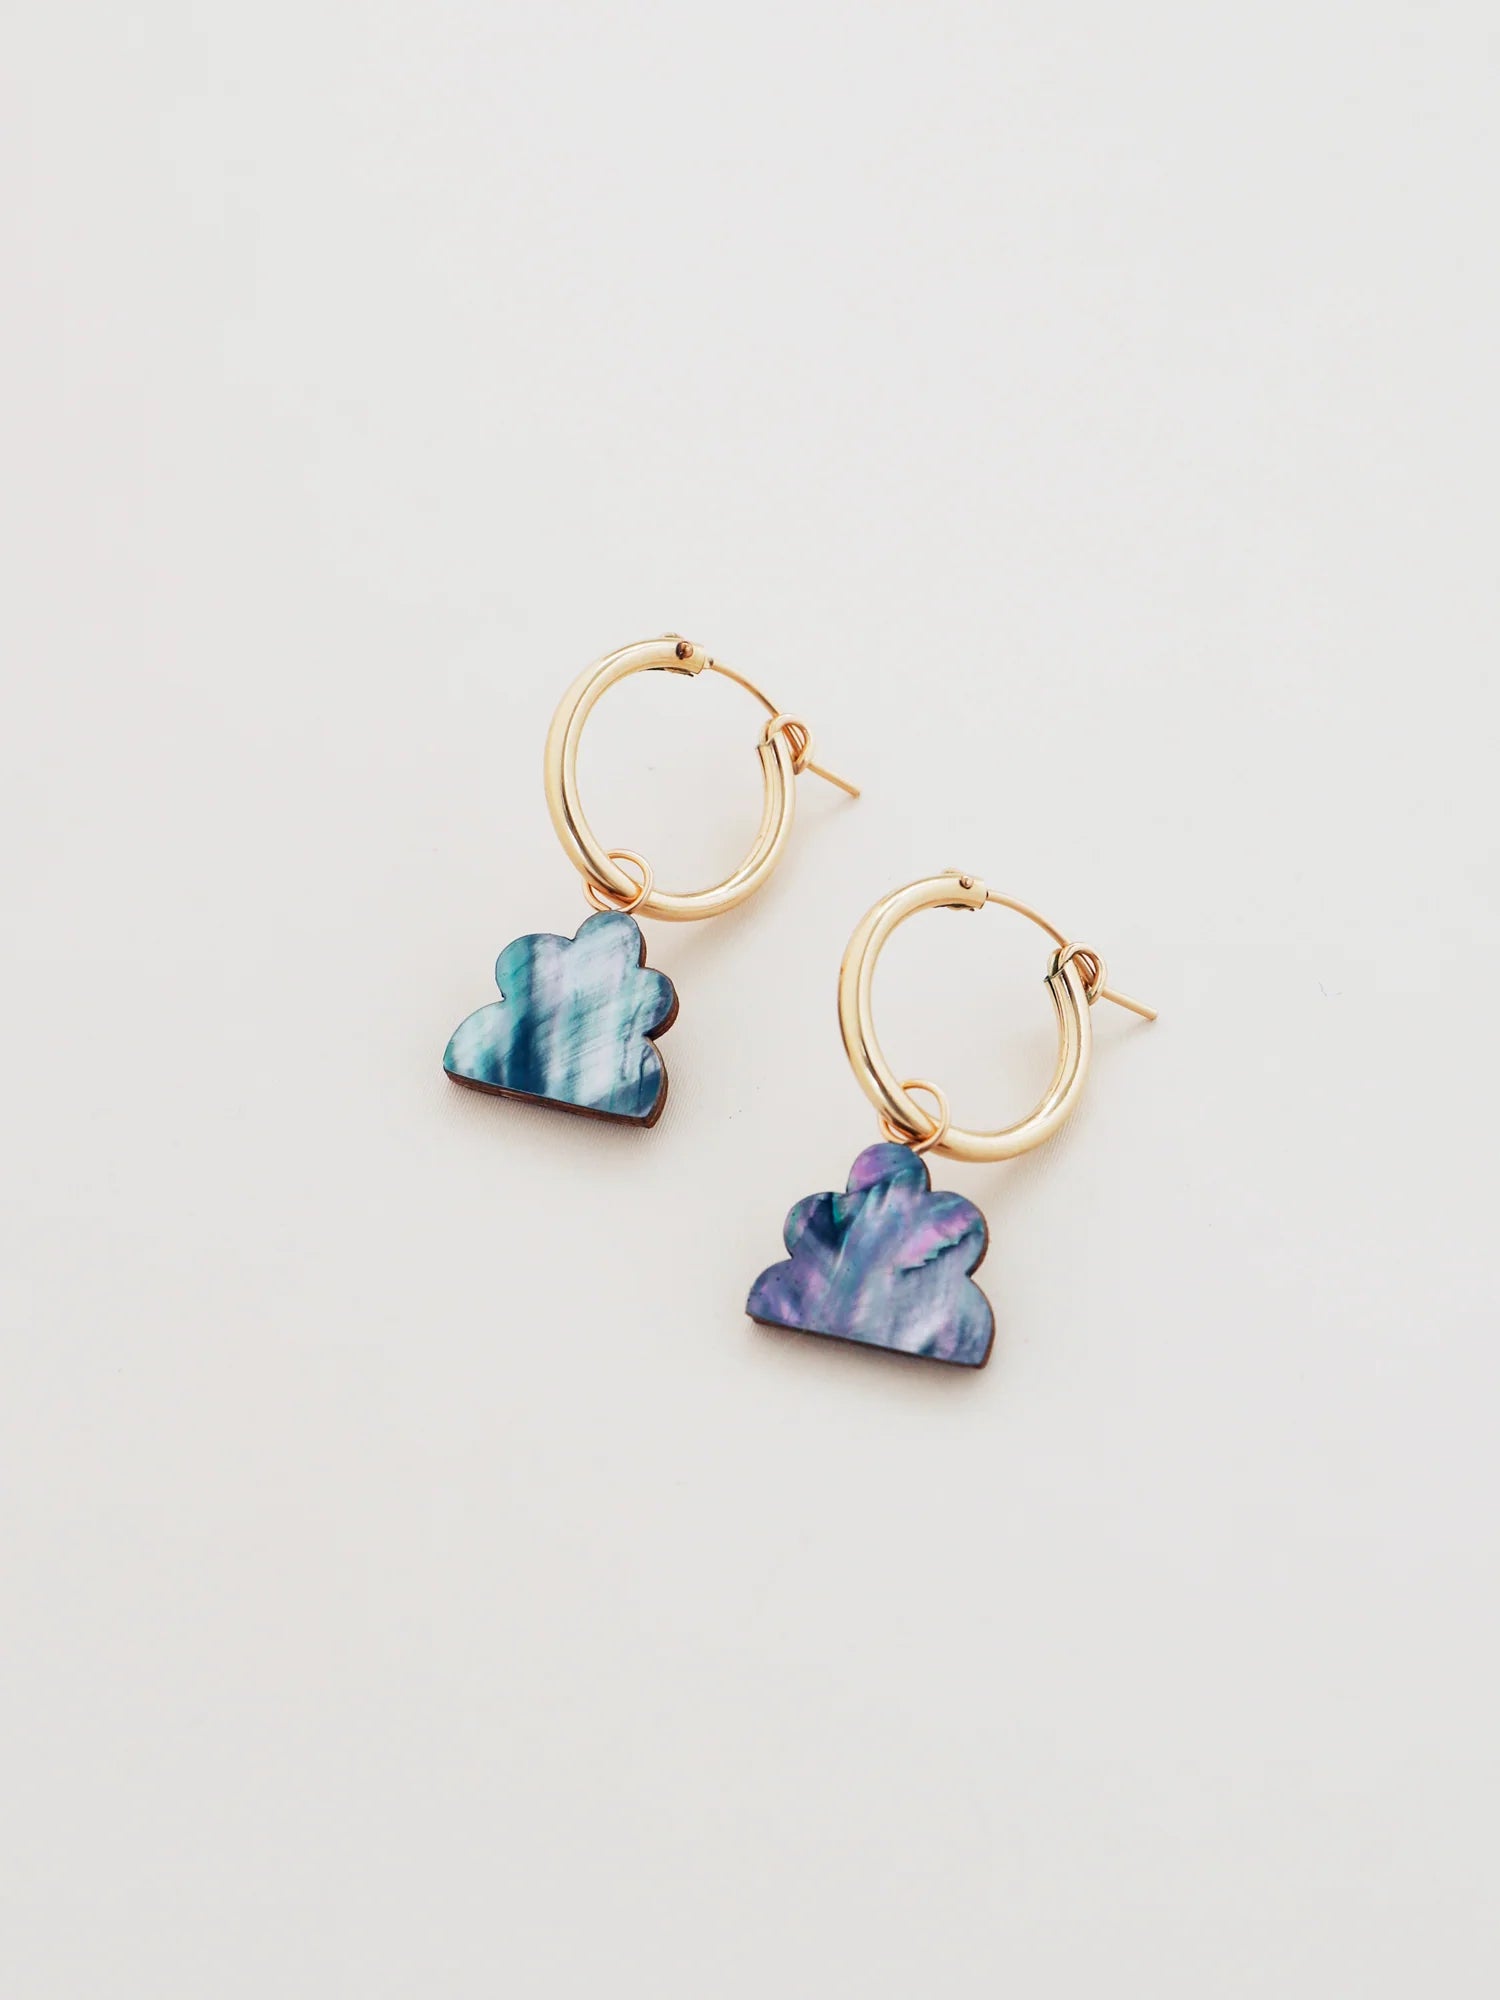 The Every Space Lena hoop earrings with gold filled hoops and iridescent shell veneer charms by Wolf & Moon